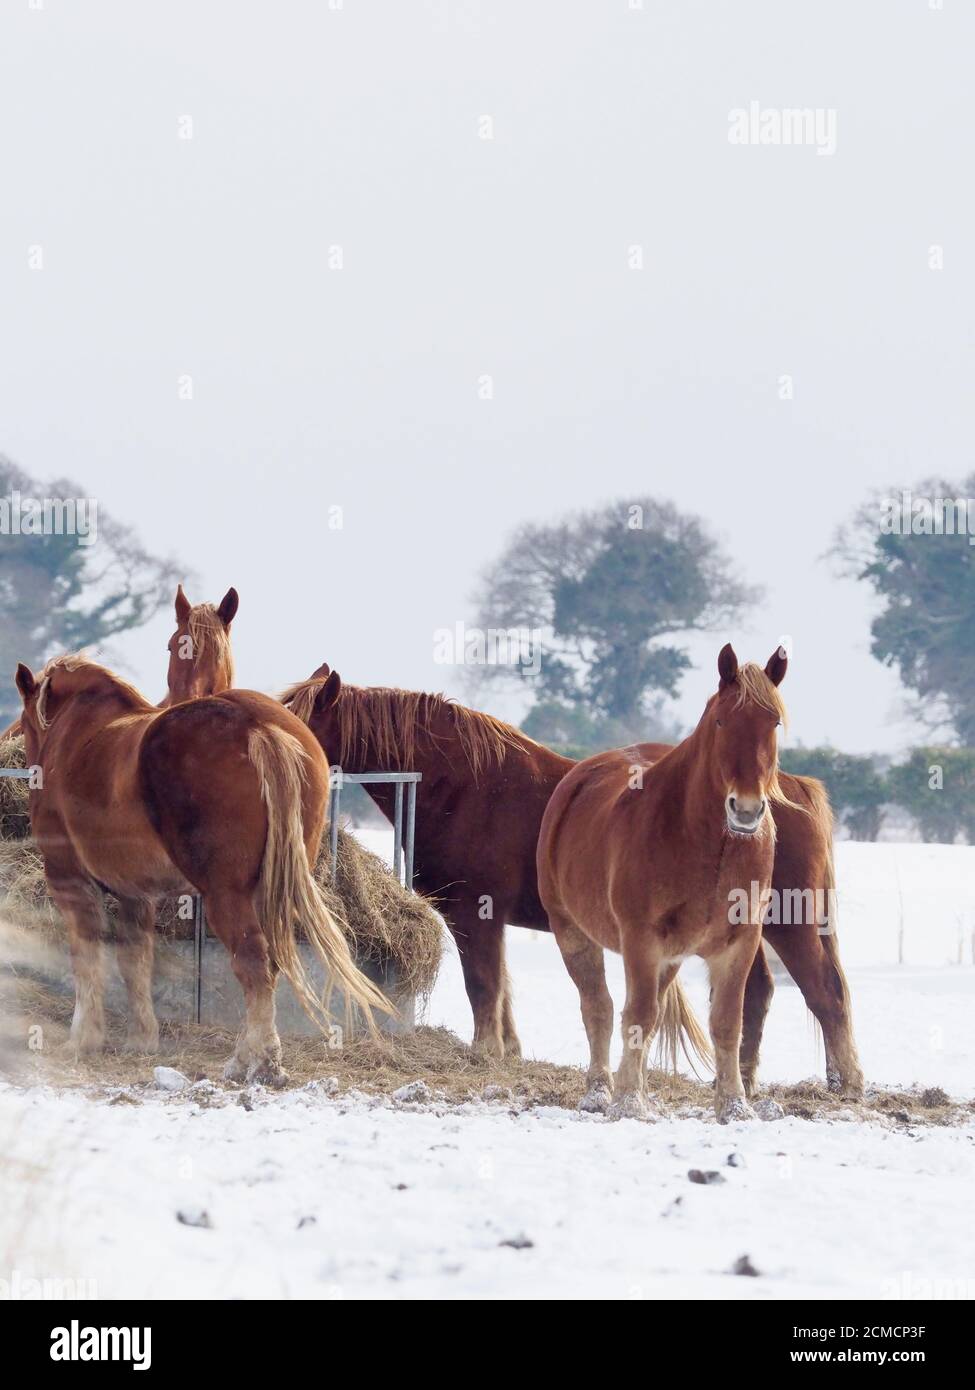 A herd of horses eat hay during a cold and snowy winter. Stock Photo